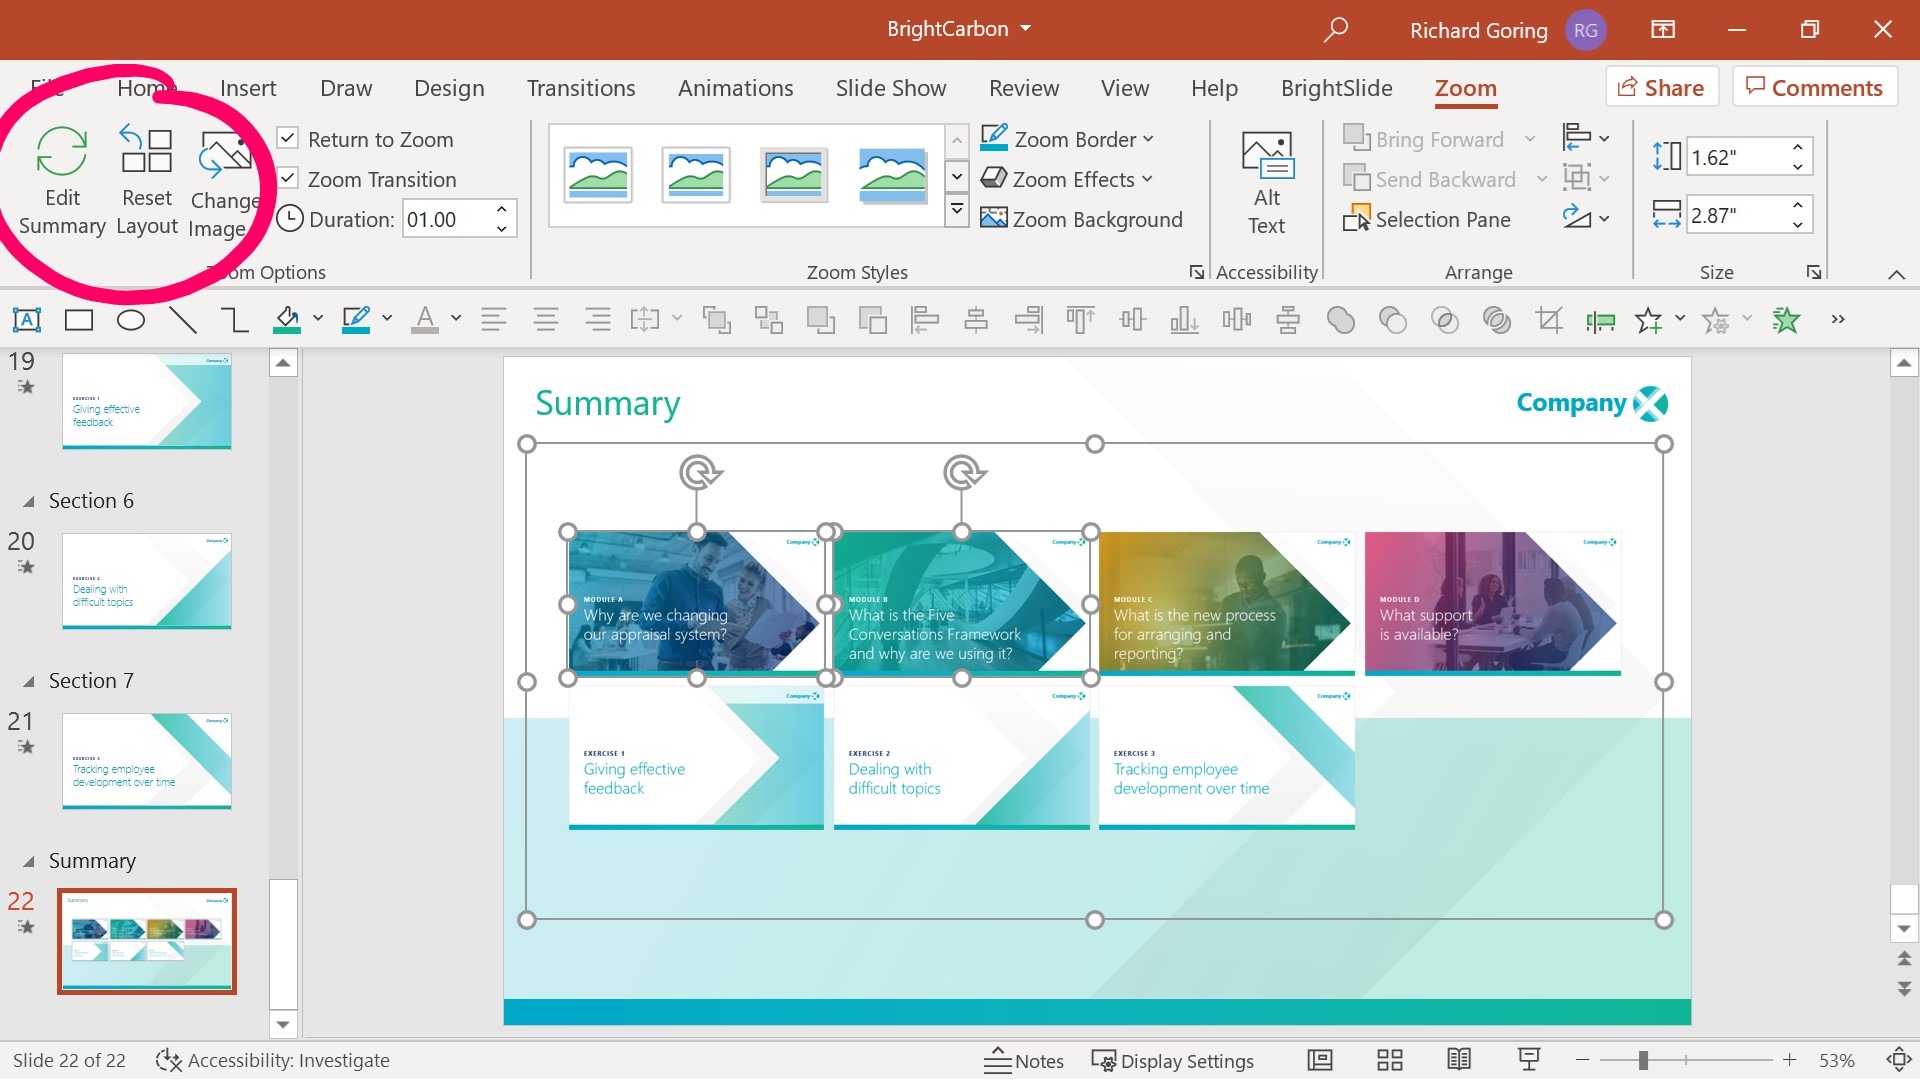 PowerPoint screenshot with the Edit Summary and Reset Layout functions circled in the Zoom tab